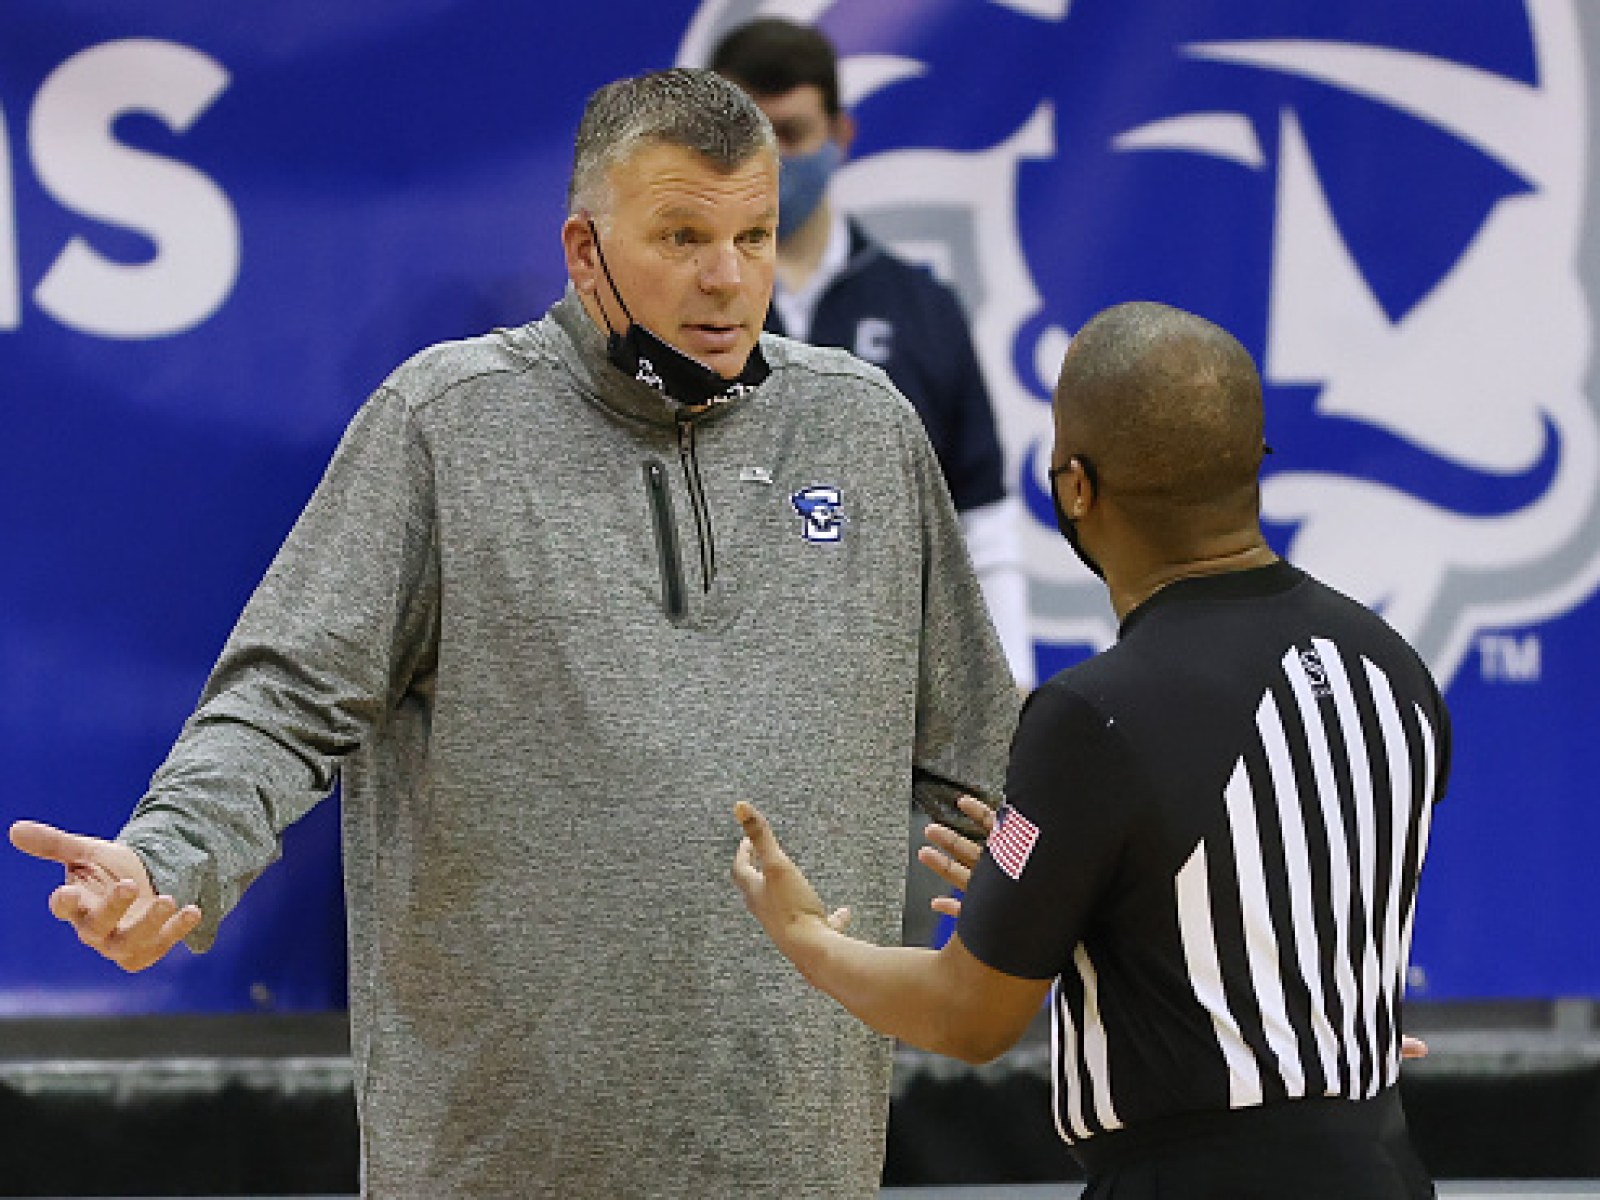 Creighton Suspends Basketball Coach For 'Plantation' Remarks To His Team